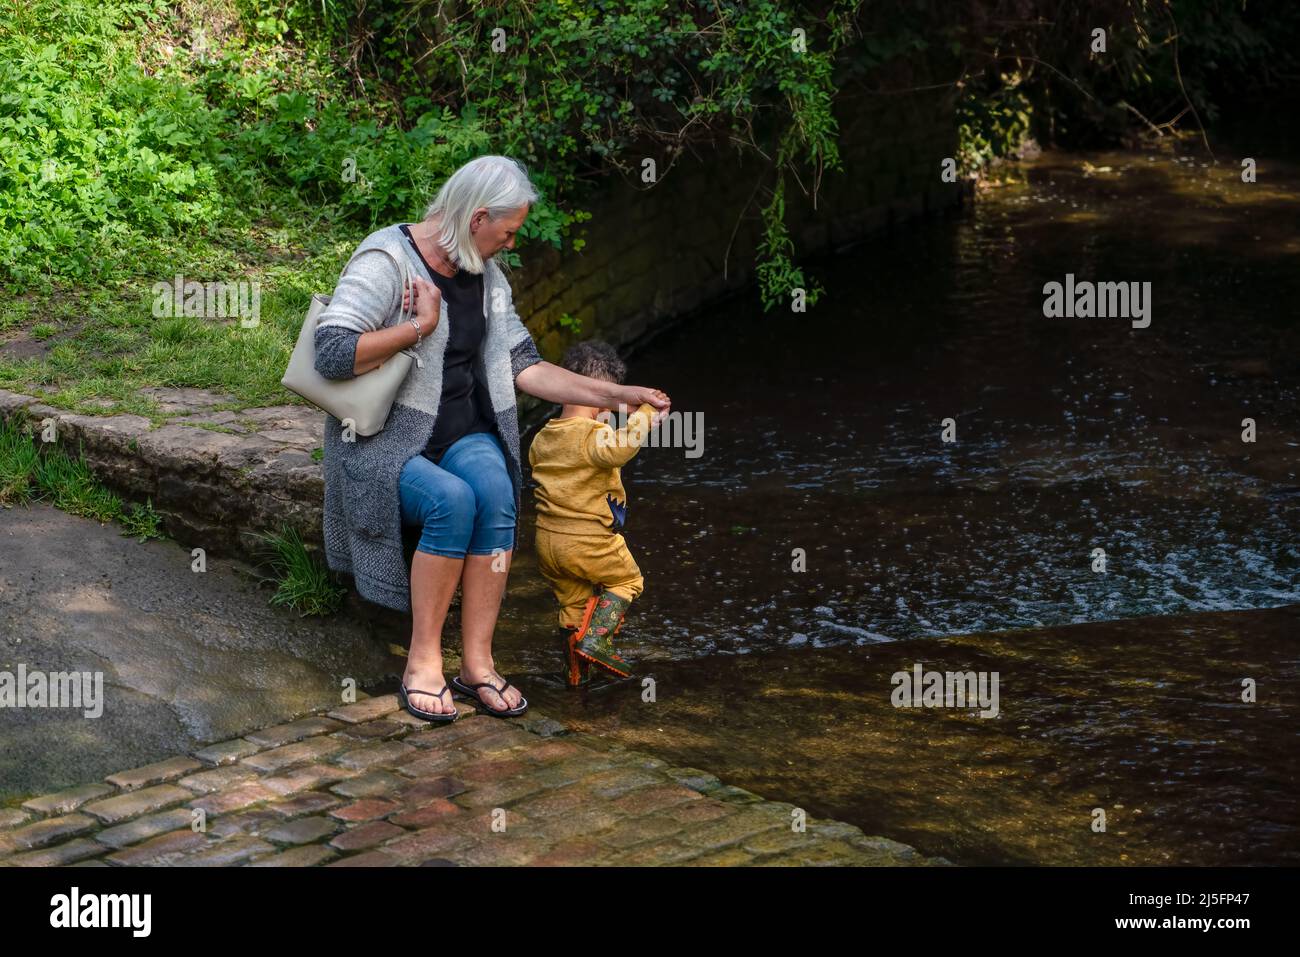 grandmother sits anmd holds the hand of her grandson as he paddles in a shallow brook, sunshine and dappled shade Stock Photo